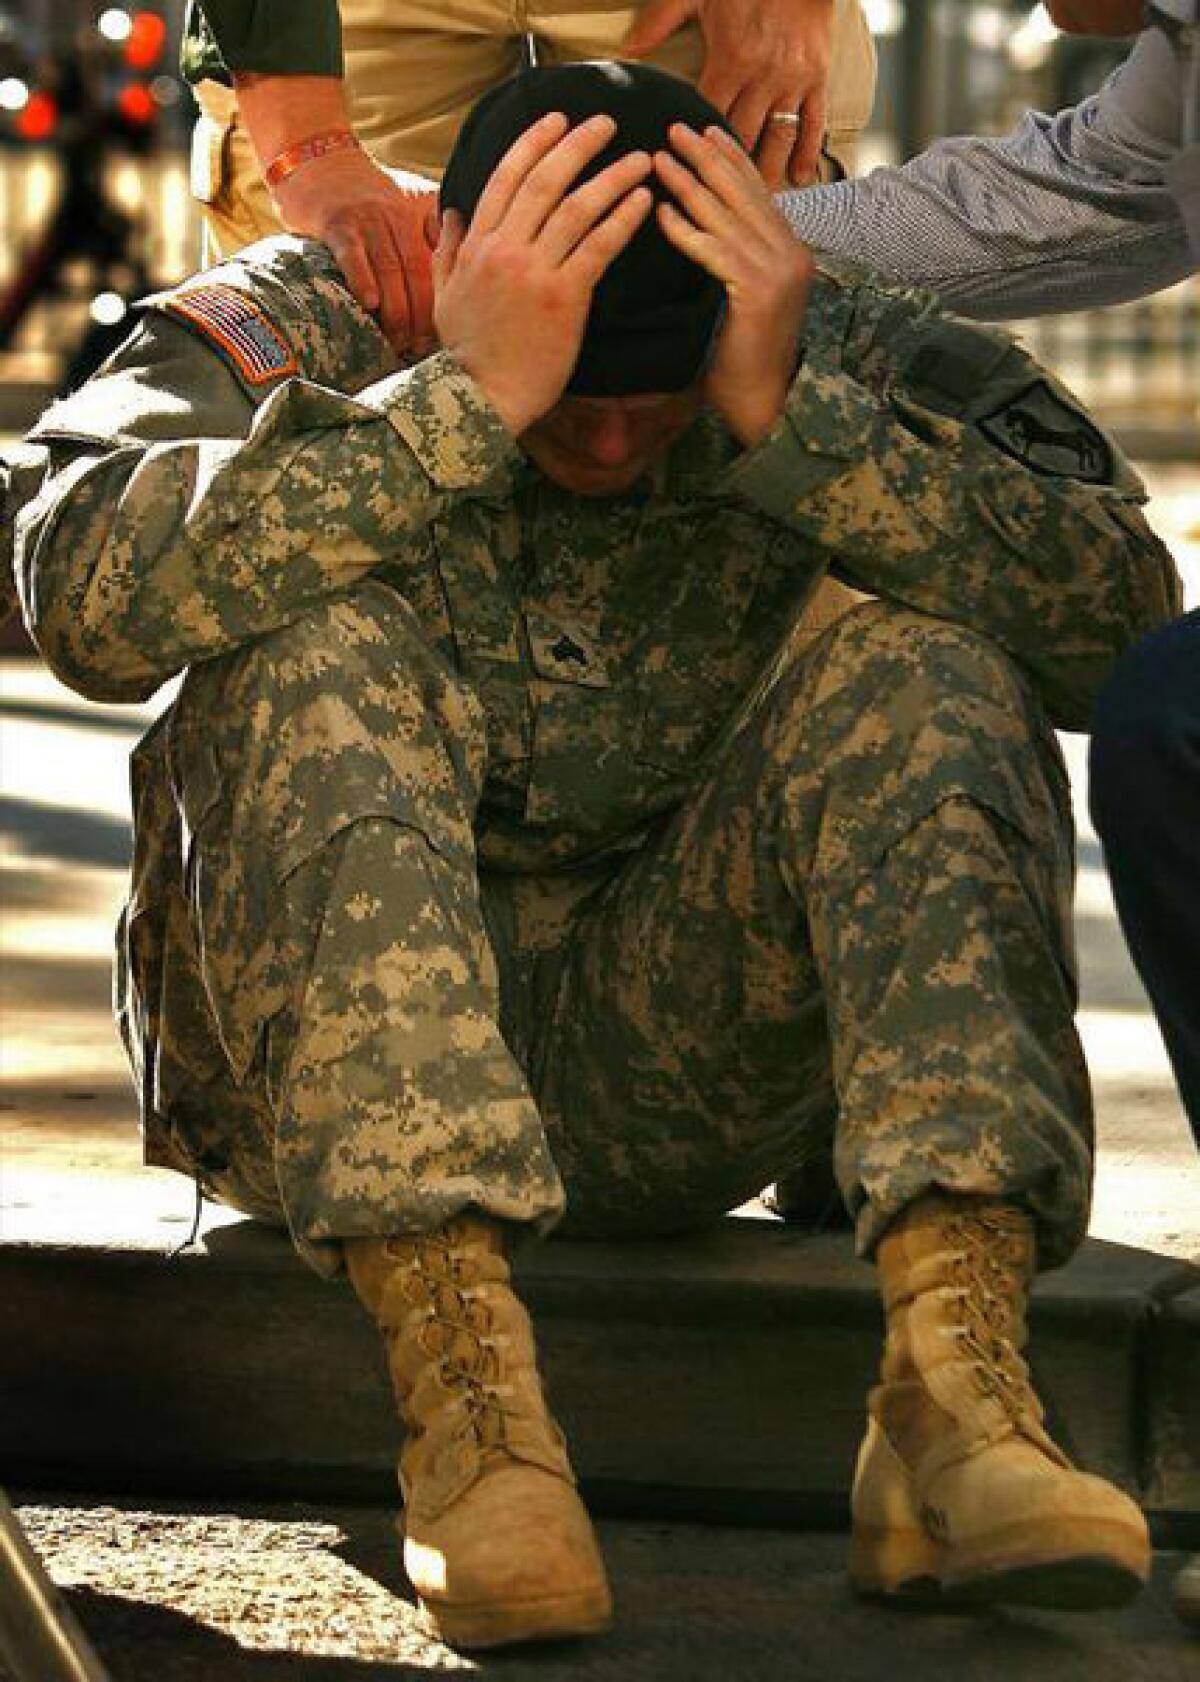 U.S. Army Sgt. Ryan Kahlor is comforted by his father, Tim, during a Veteran's Day parade in Las Vegas in which he was the honored guest on Nov. 11, 2008. His distress was triggered by the familiar sounds and smell of a passing Bradley Fighting Vehicle -- the same type of vehicle he had seen comrades die on while serving two tours in Iraq.